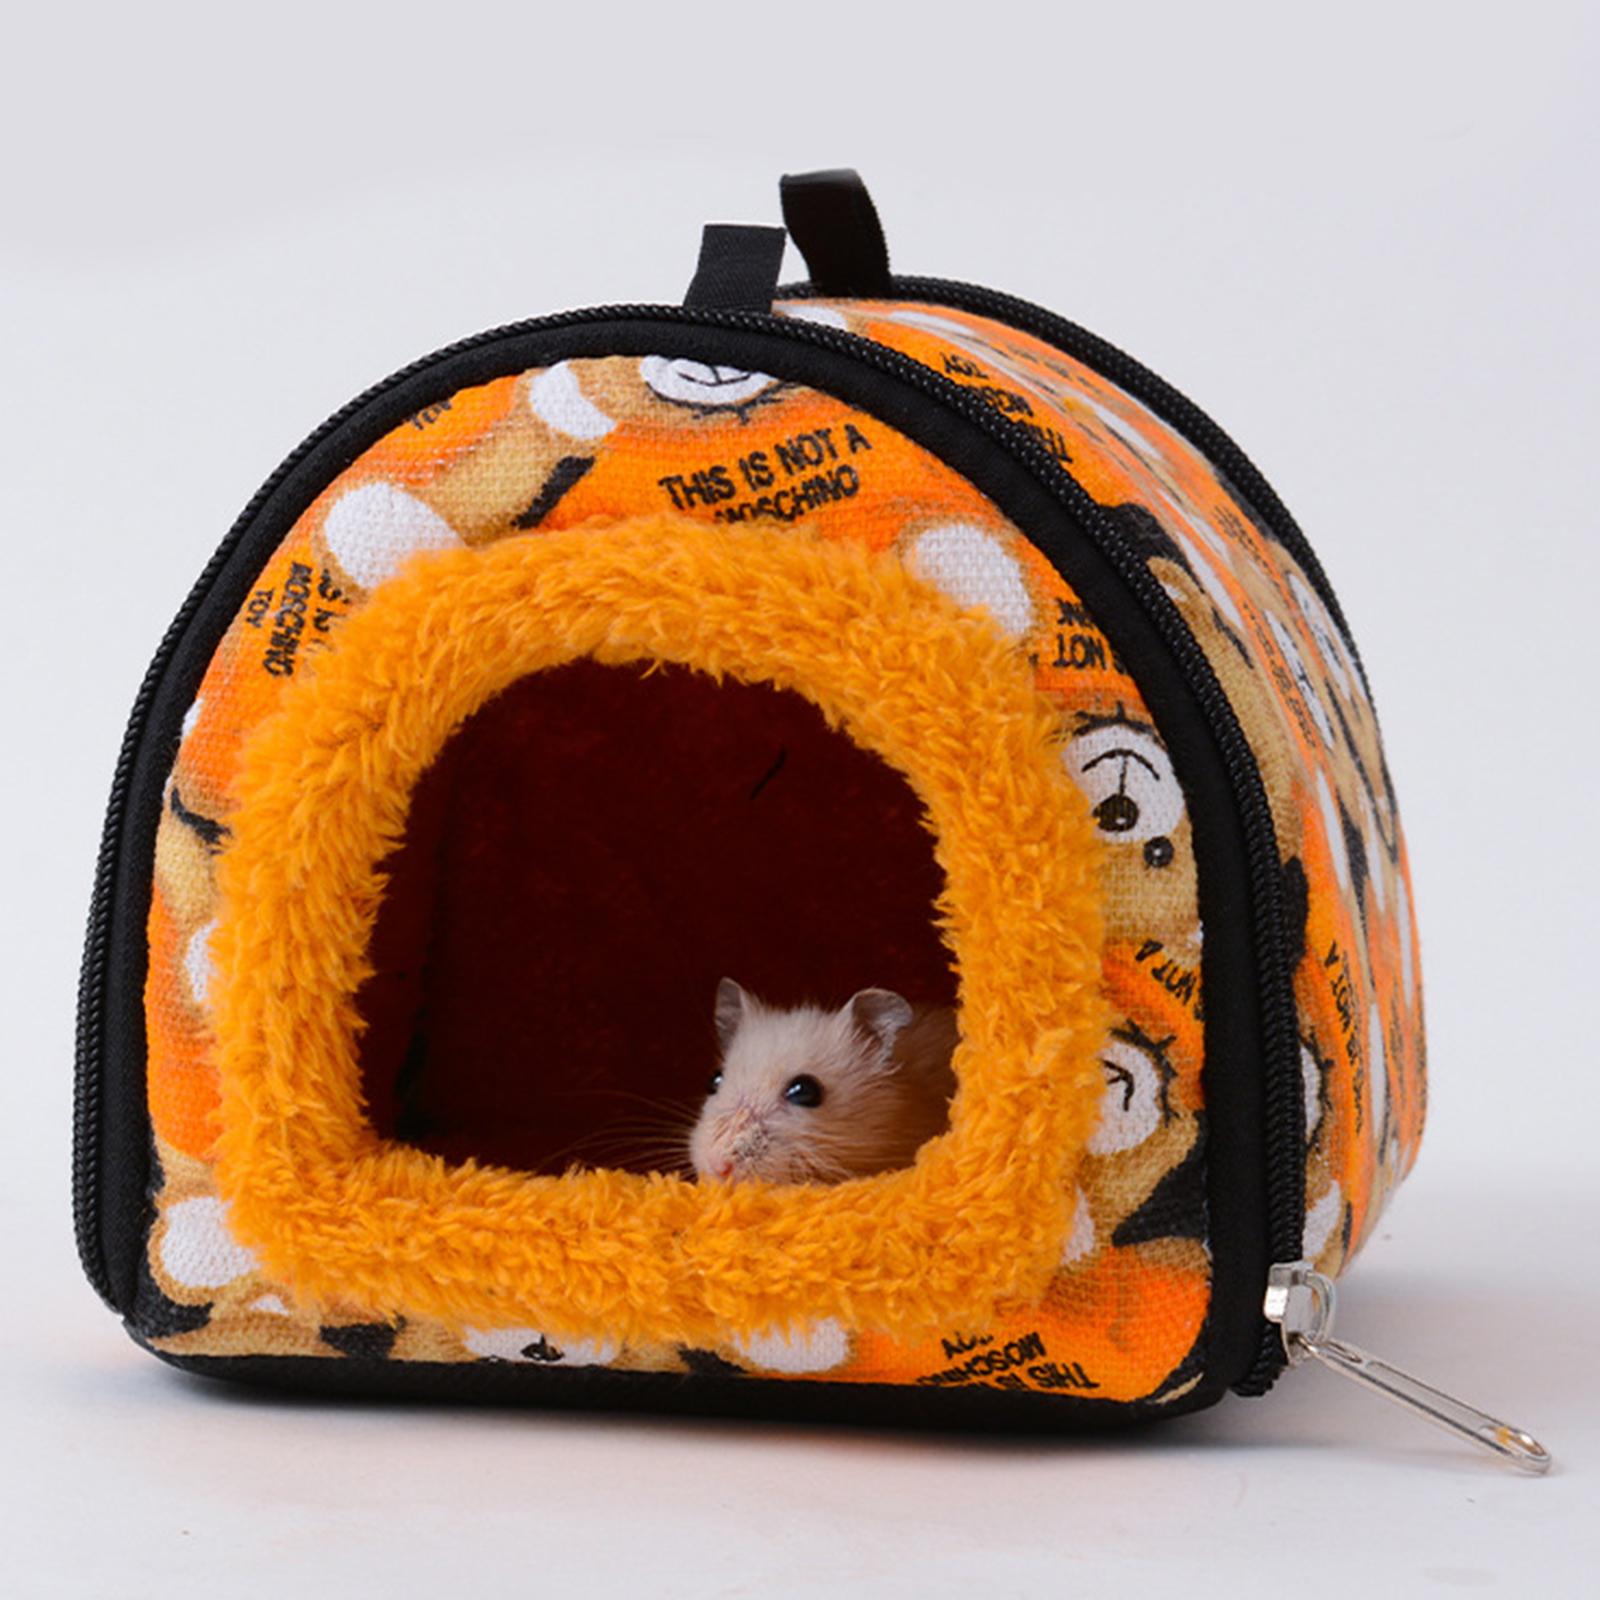 Guinea Pig Bed Nest Hamster House for Sugar Glider Rabbit Small Pet Supplies Brown Bear L